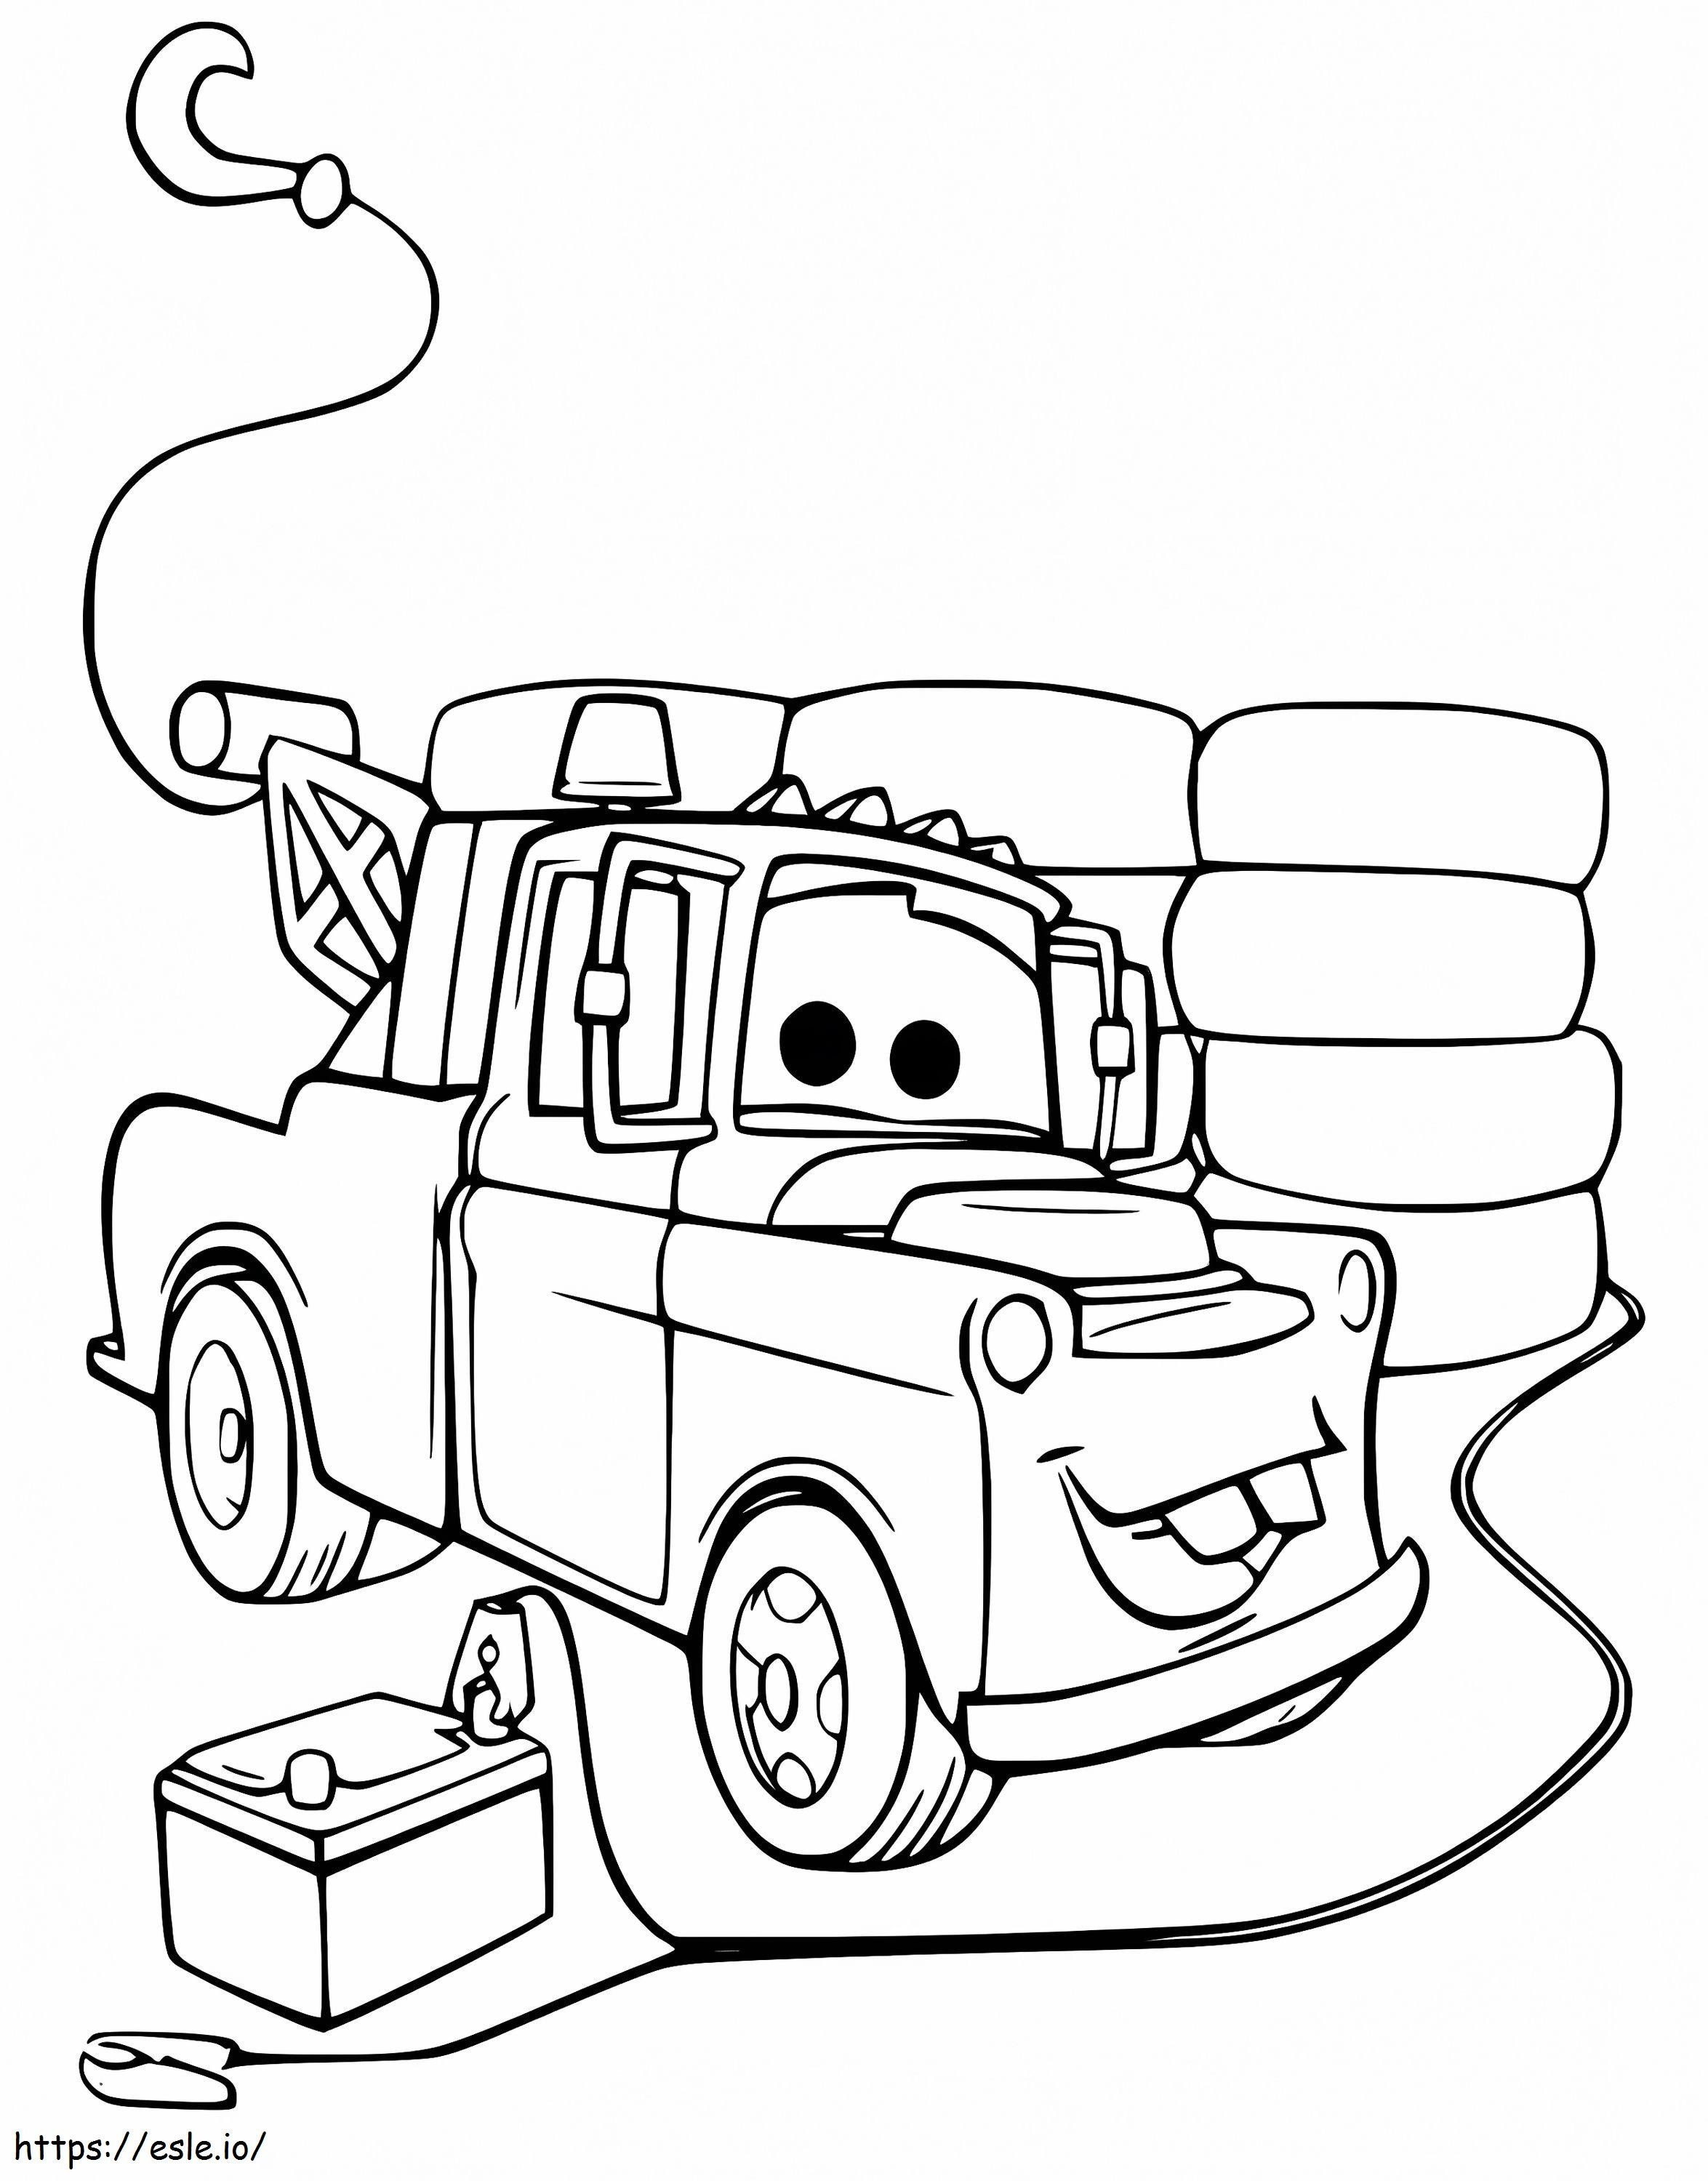 Sir Tow Mater From Cars coloring page